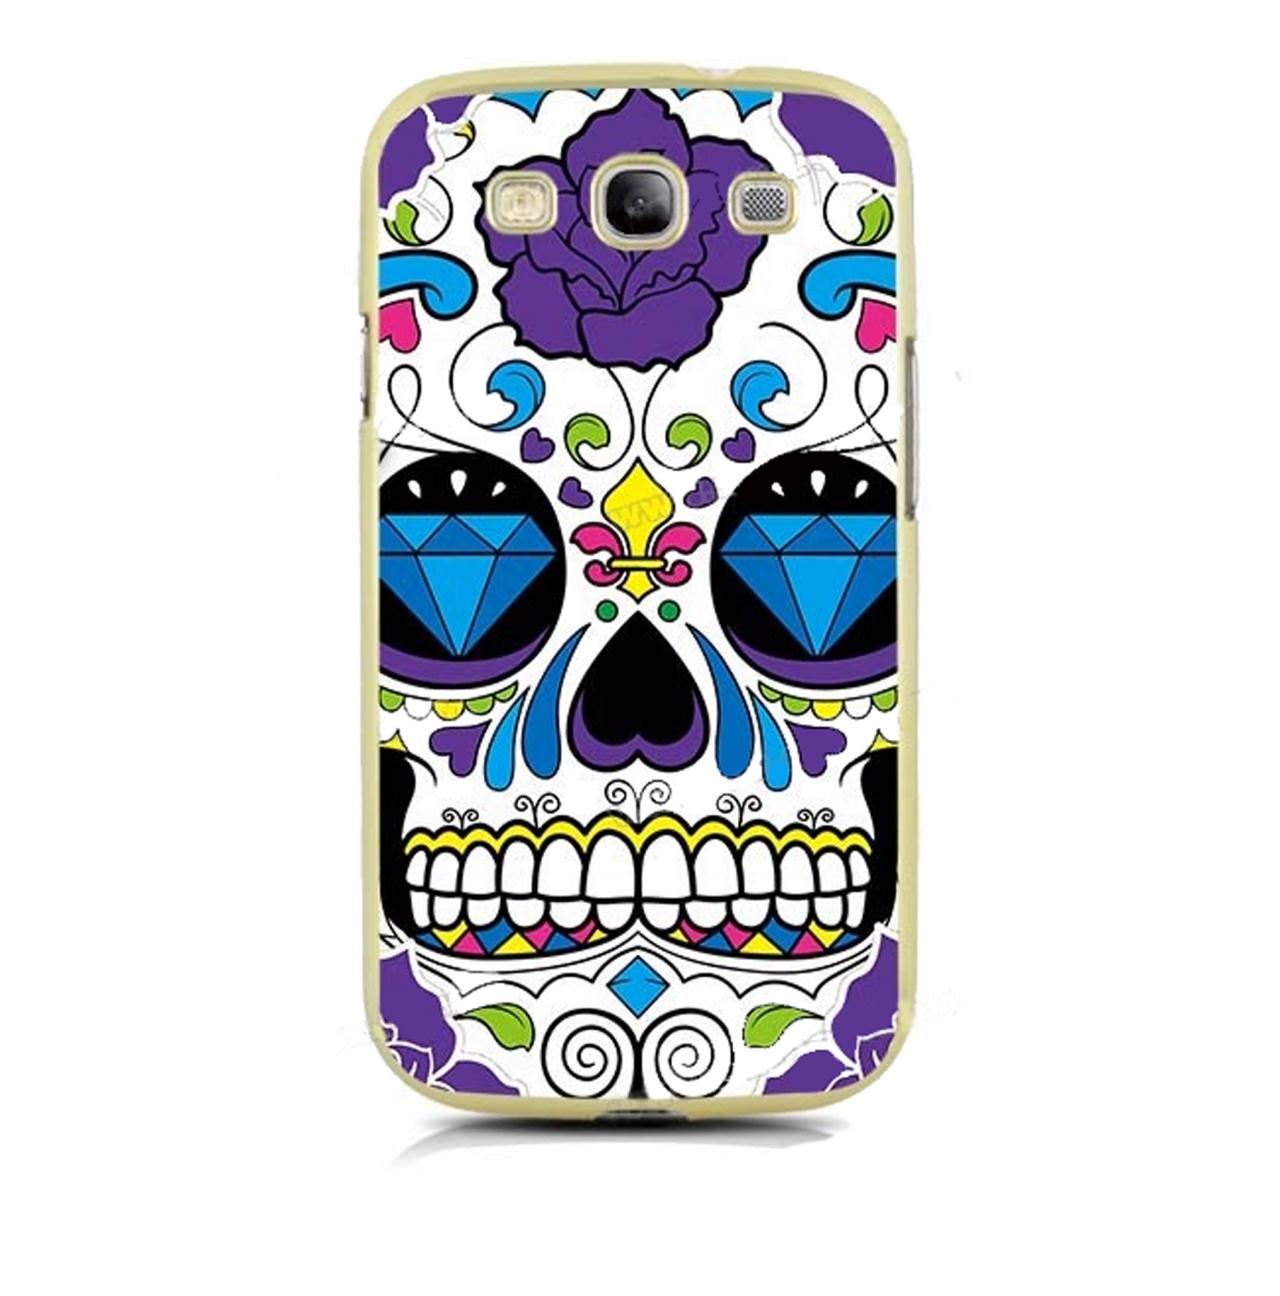 Colorful Diamond Flower Skull Protective Case For Iphone And Samsung Galaxy ( Screen Protector)